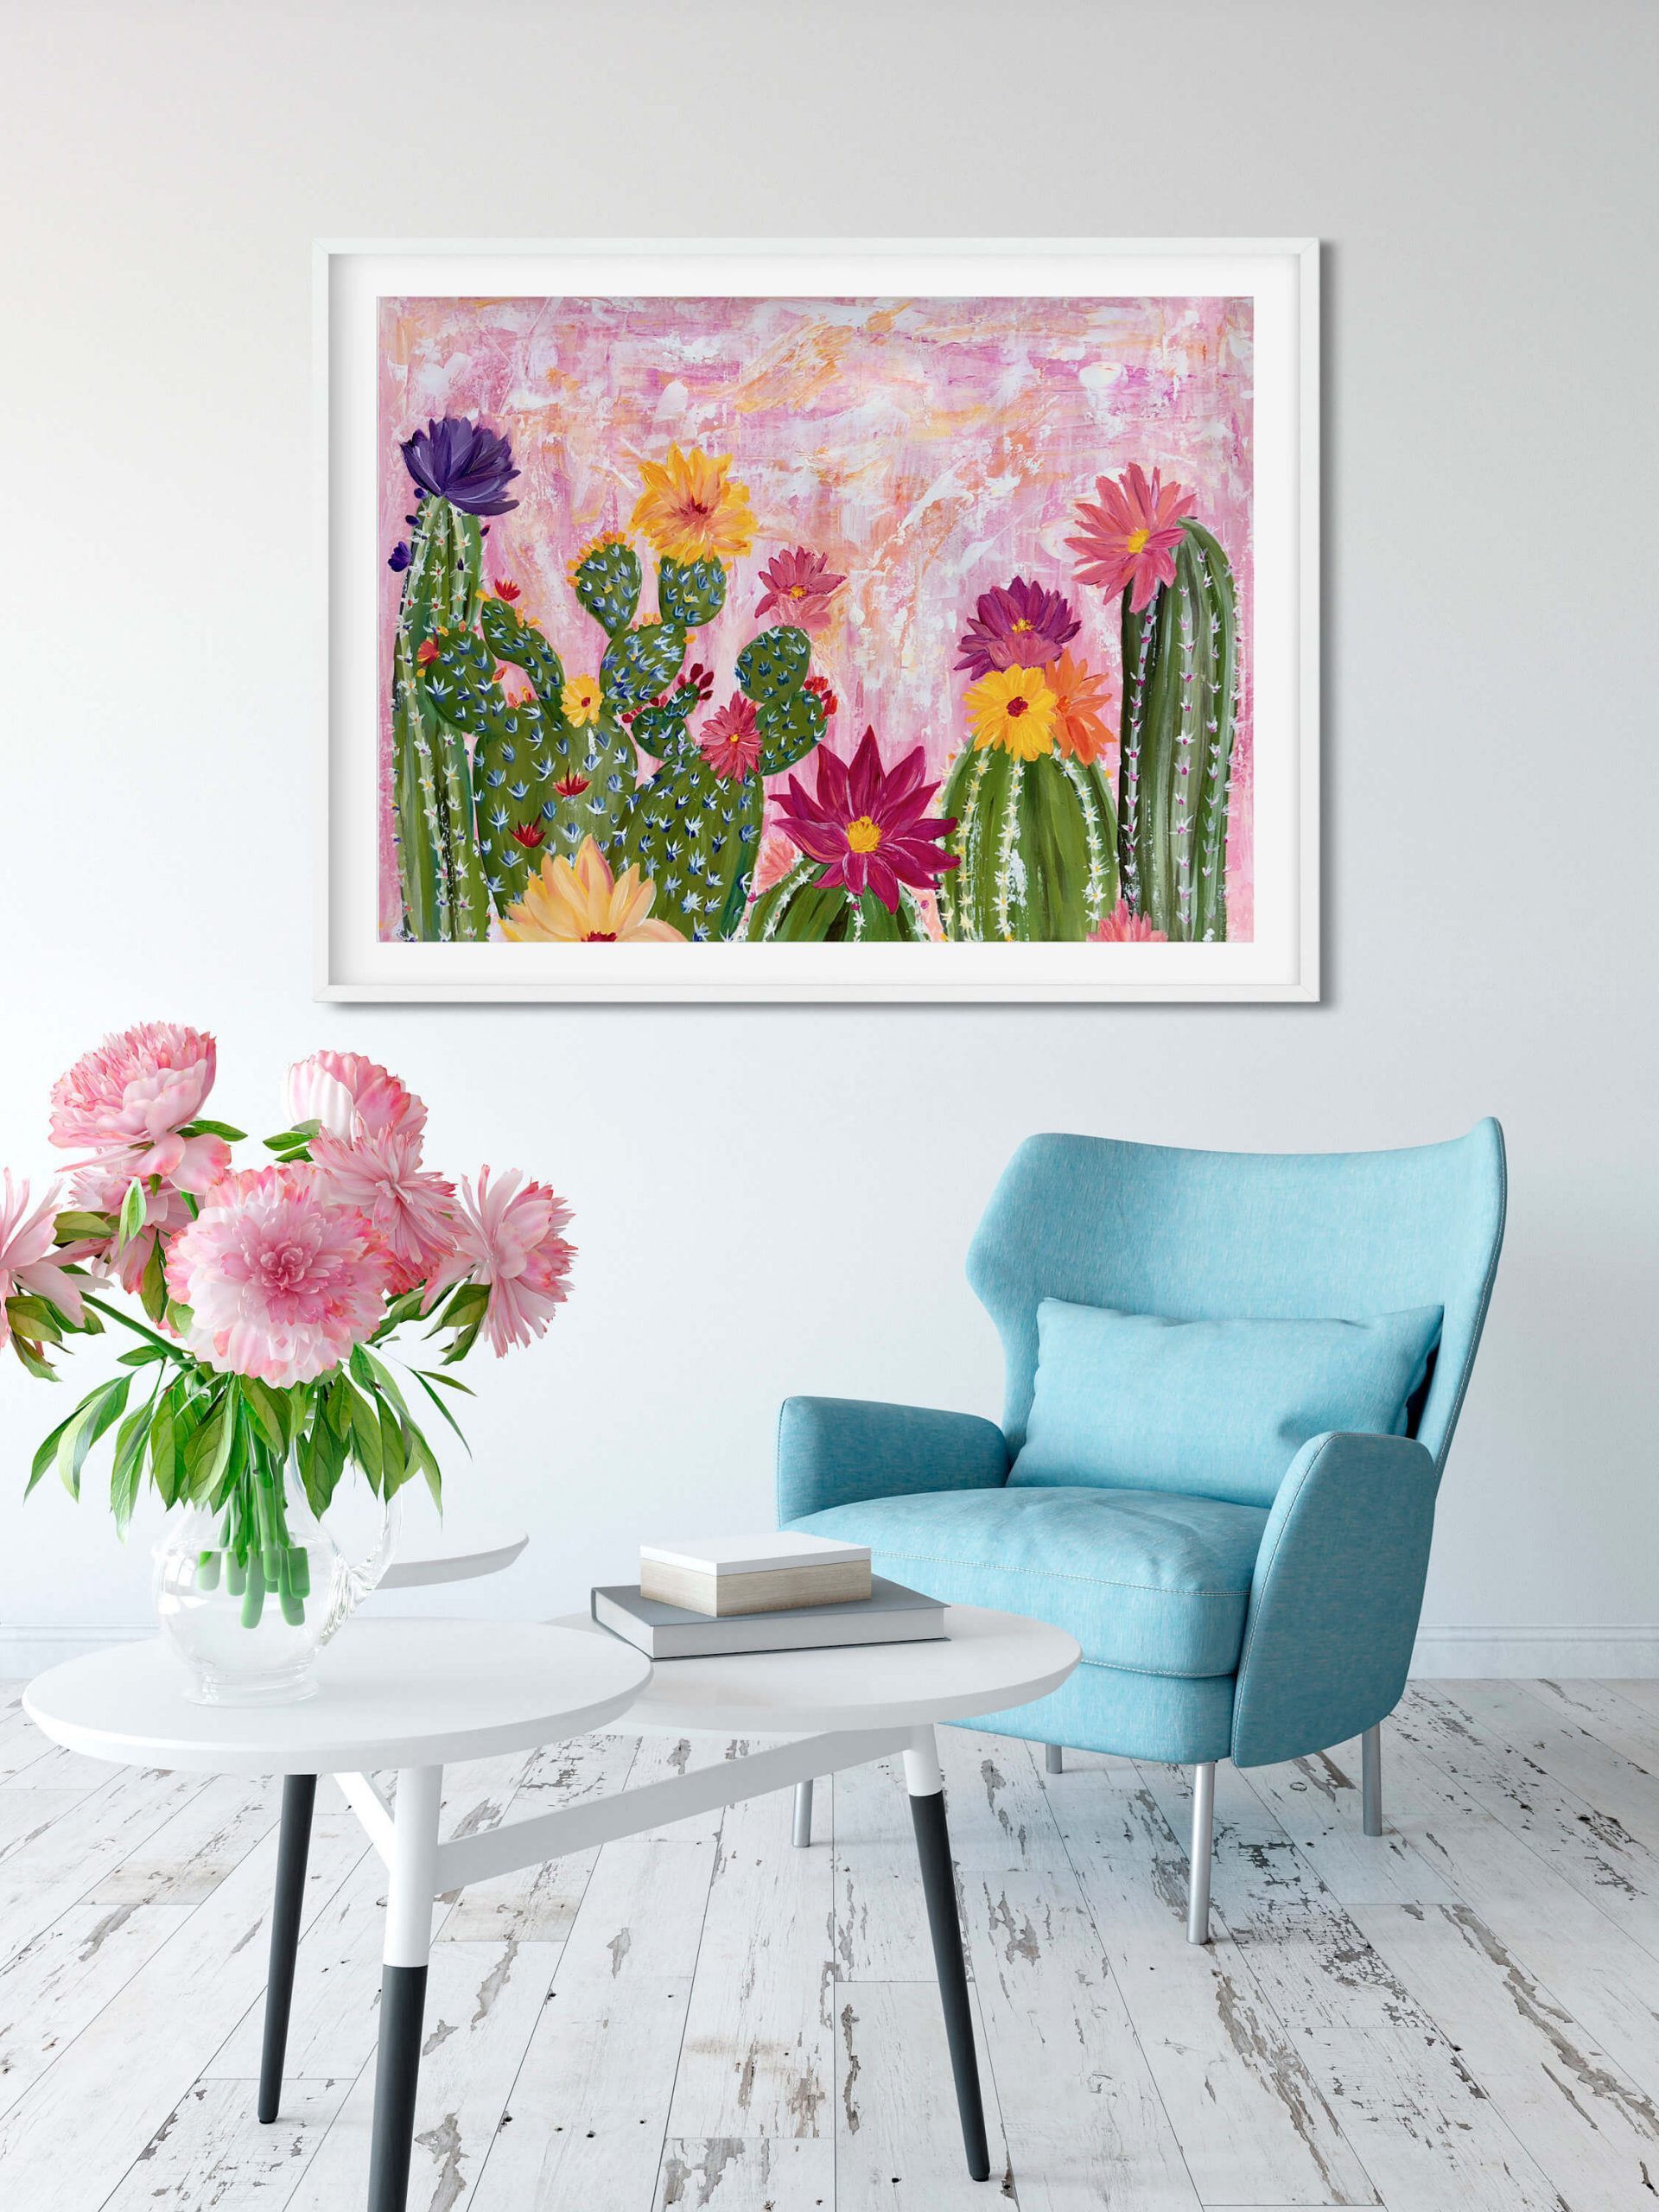 Flowering Cacti at Sunset Painting